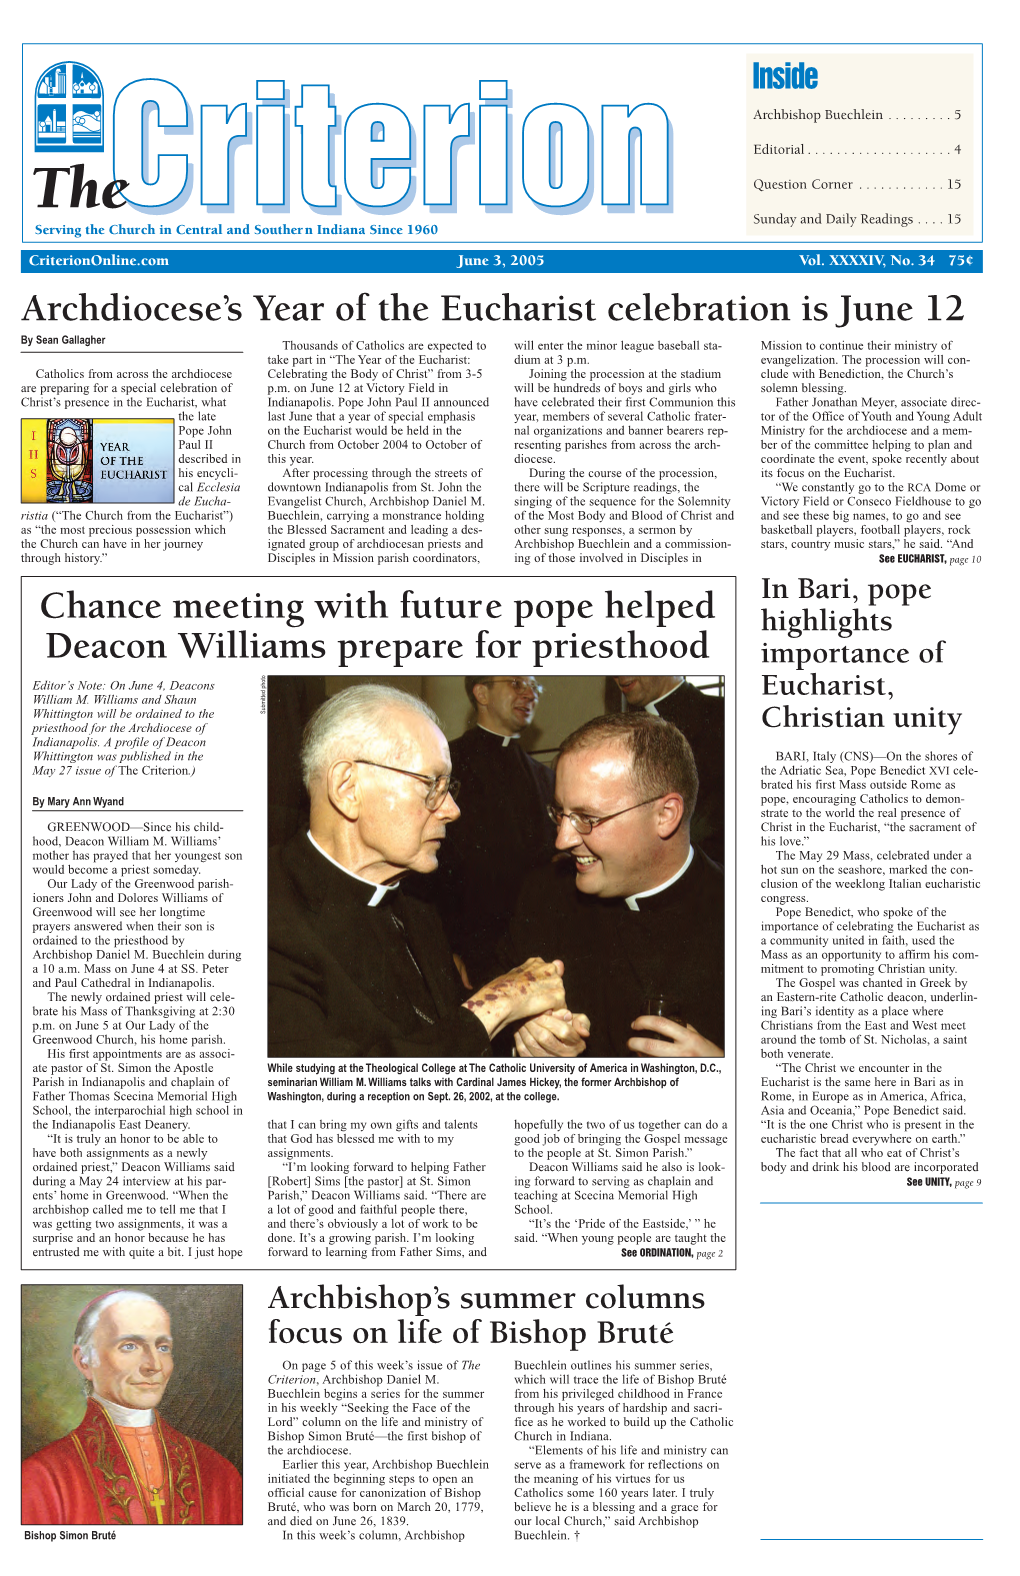 Archdiocese's Year of the Eucharist Celebration Is June 12 Chance Meeting with Future Pope Helped Deacon Williams Prepare